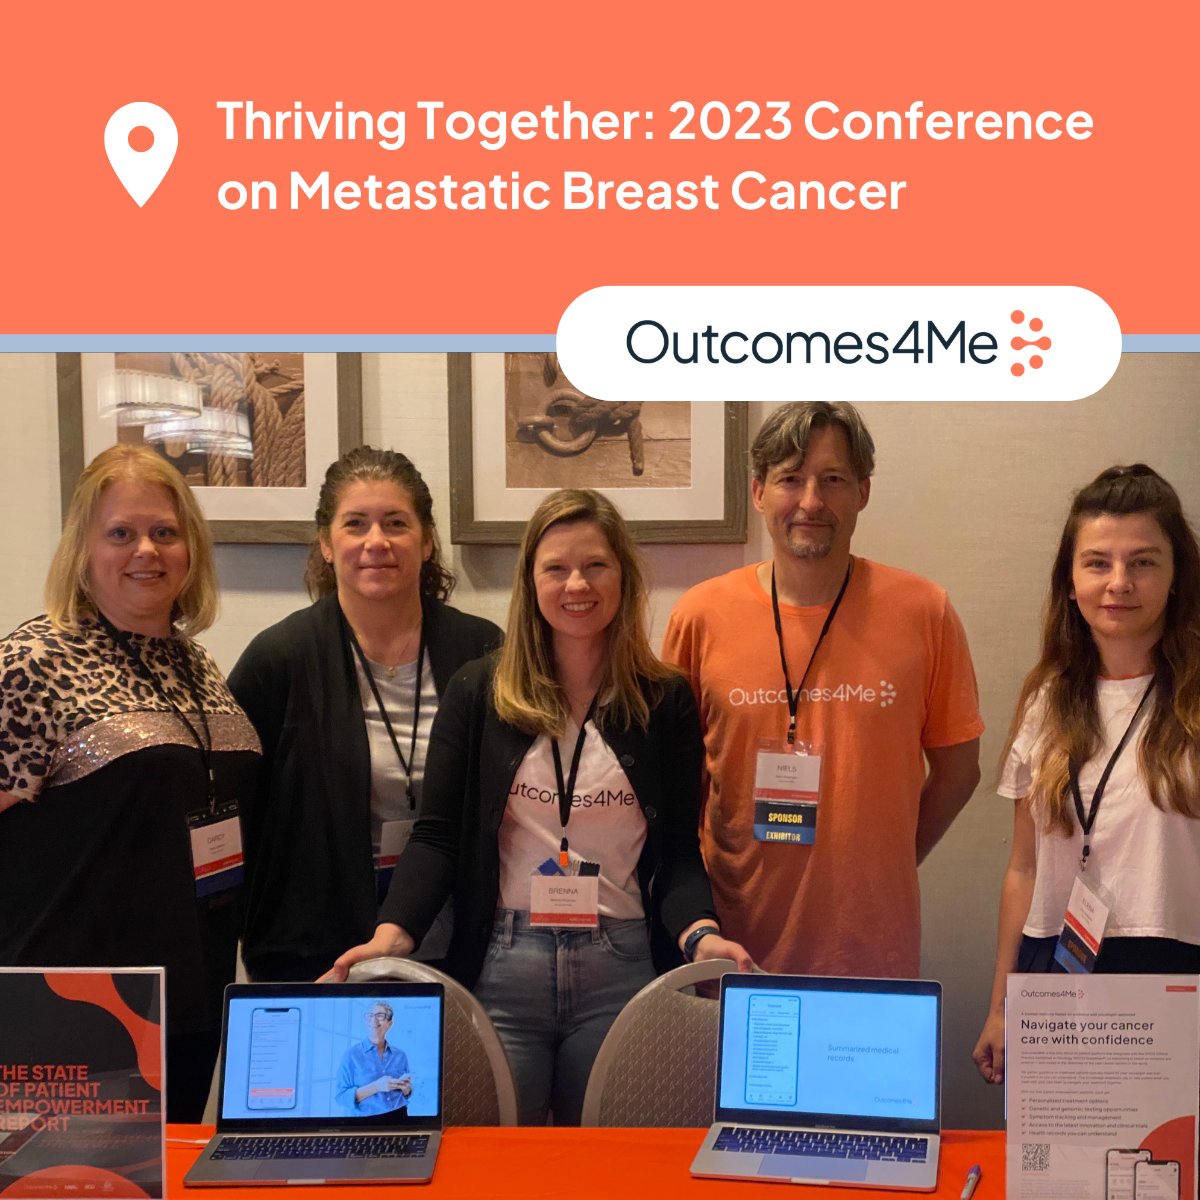 It's an honor to be at @LivingBeyondBC's Thriving Together: Conference on Metastatic Breast Cancer in Philadelphia. We're meeting so many inspiring patients and caregivers. #LBBCMetsConf